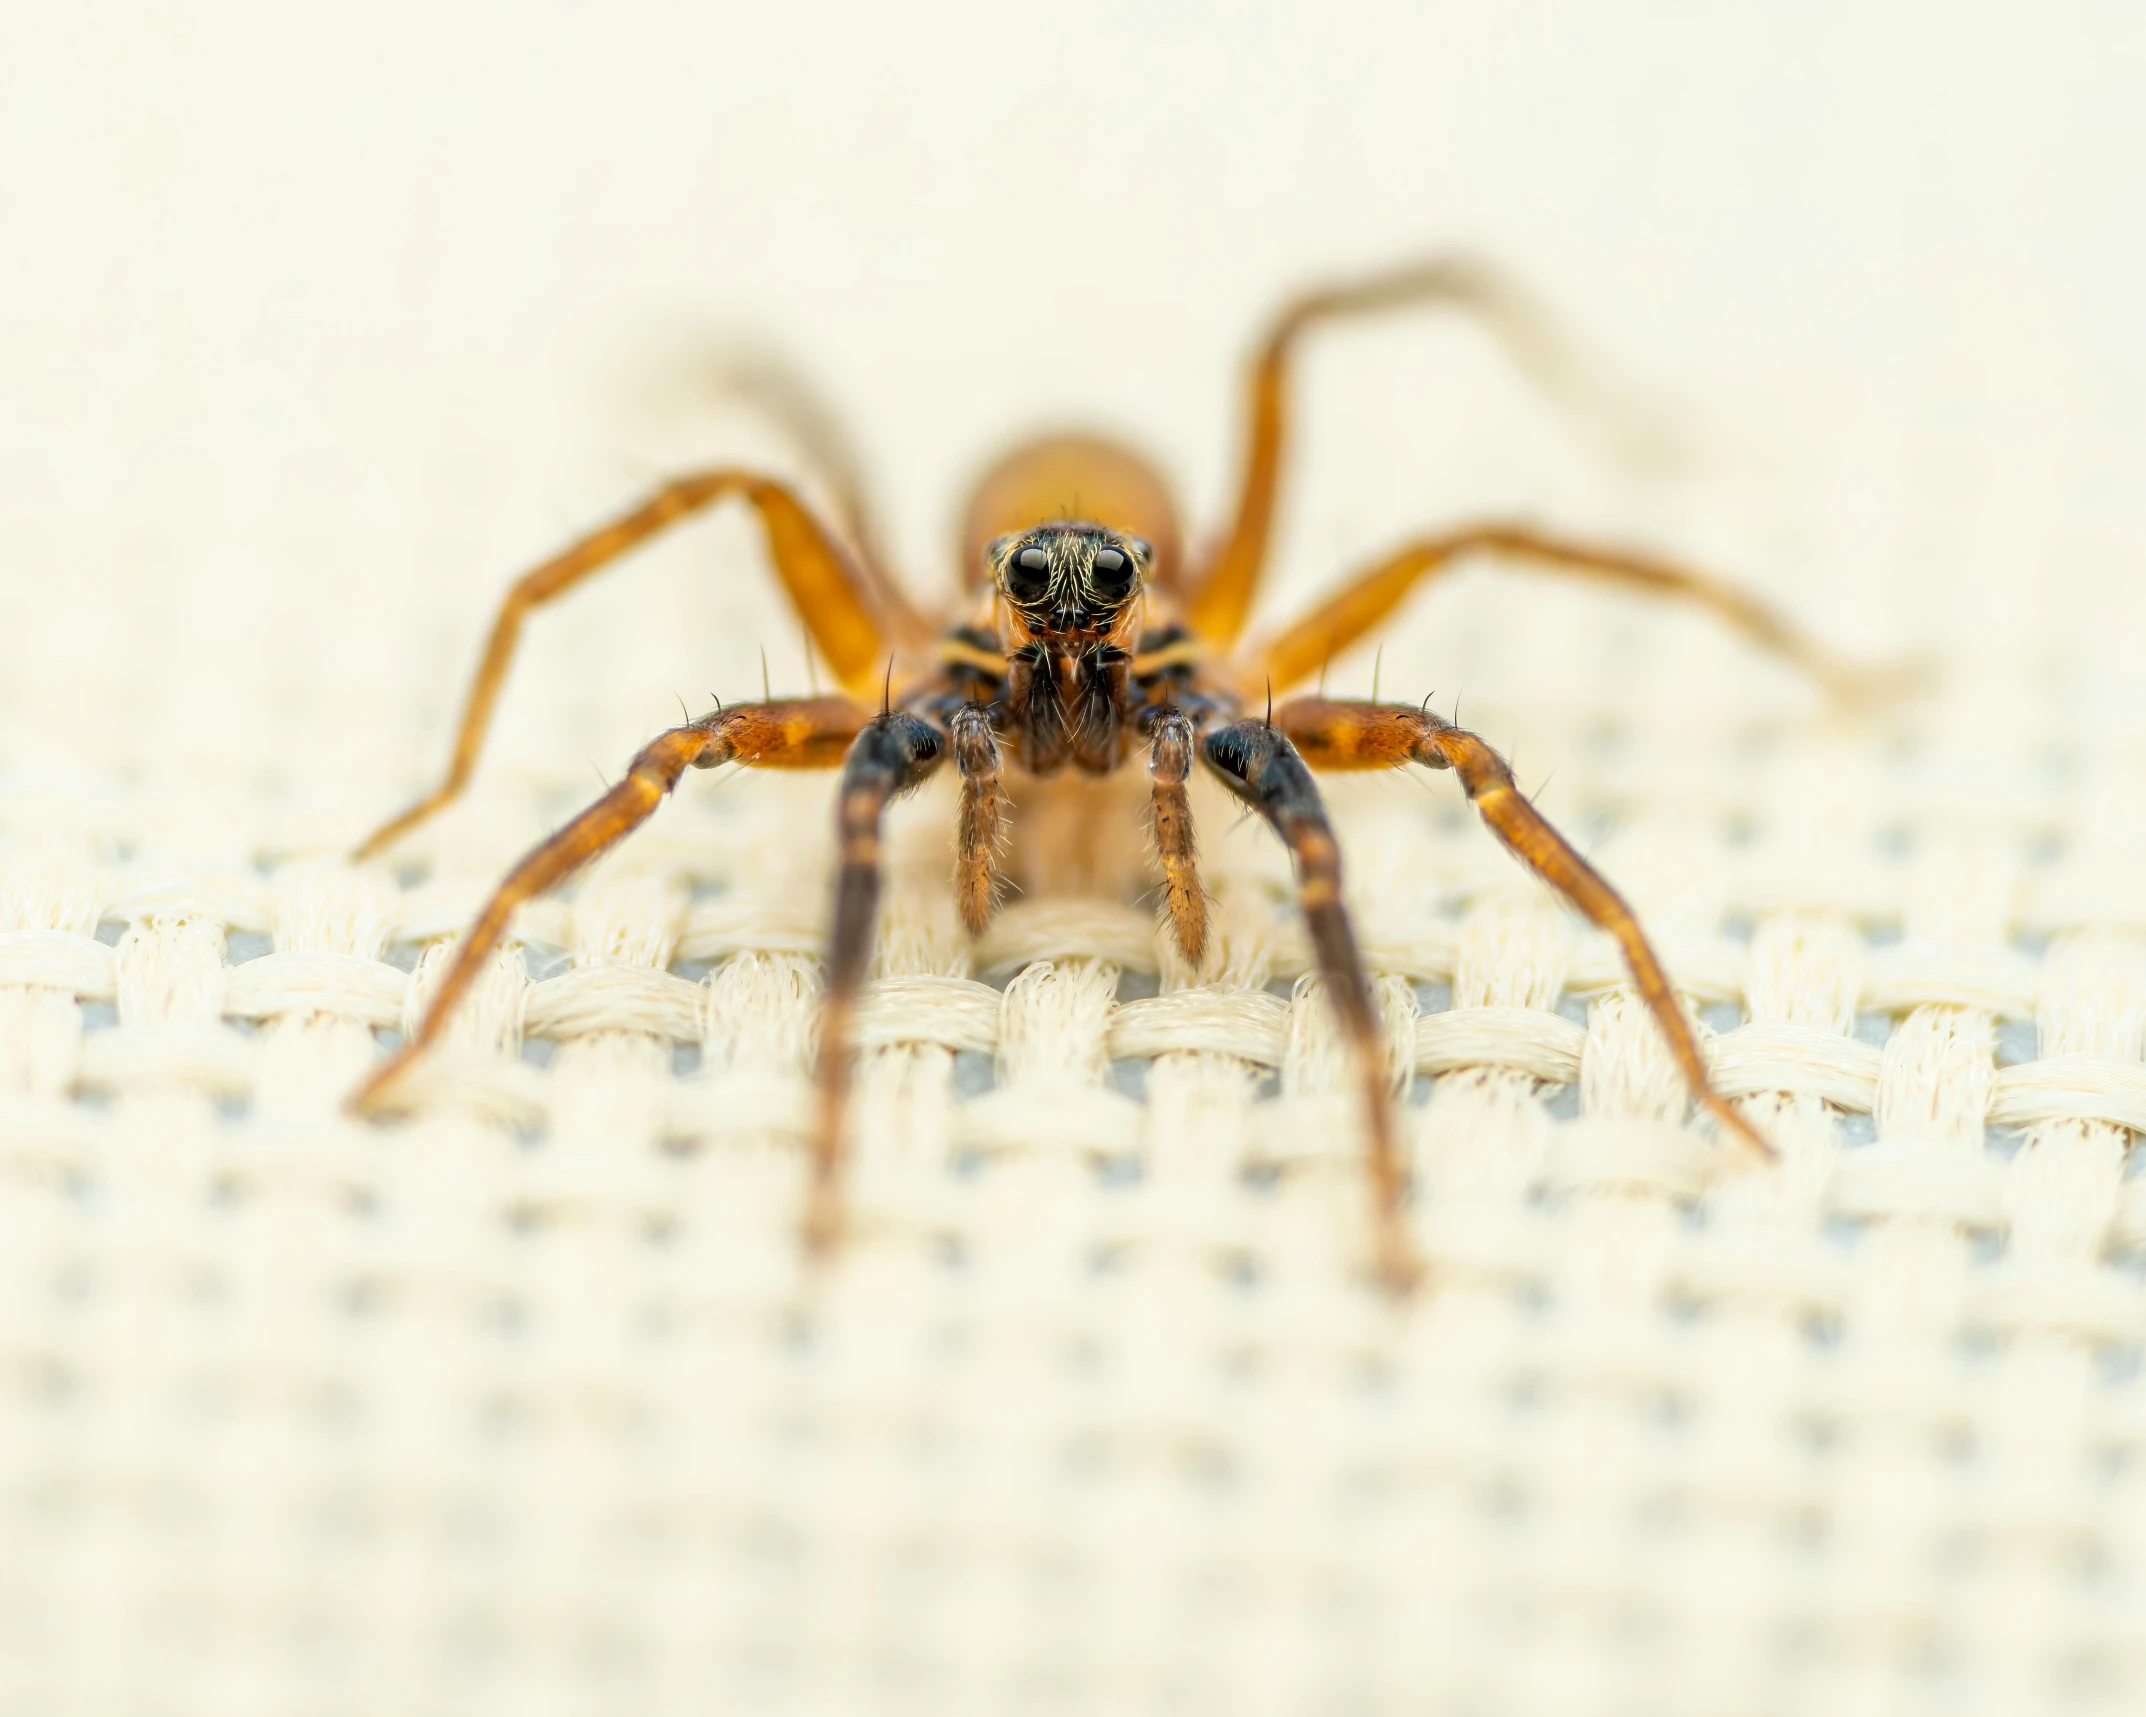 a close up of a spider on a cloth, pexels contest winner, hurufiyya, panel, brown, digital image, scorpion